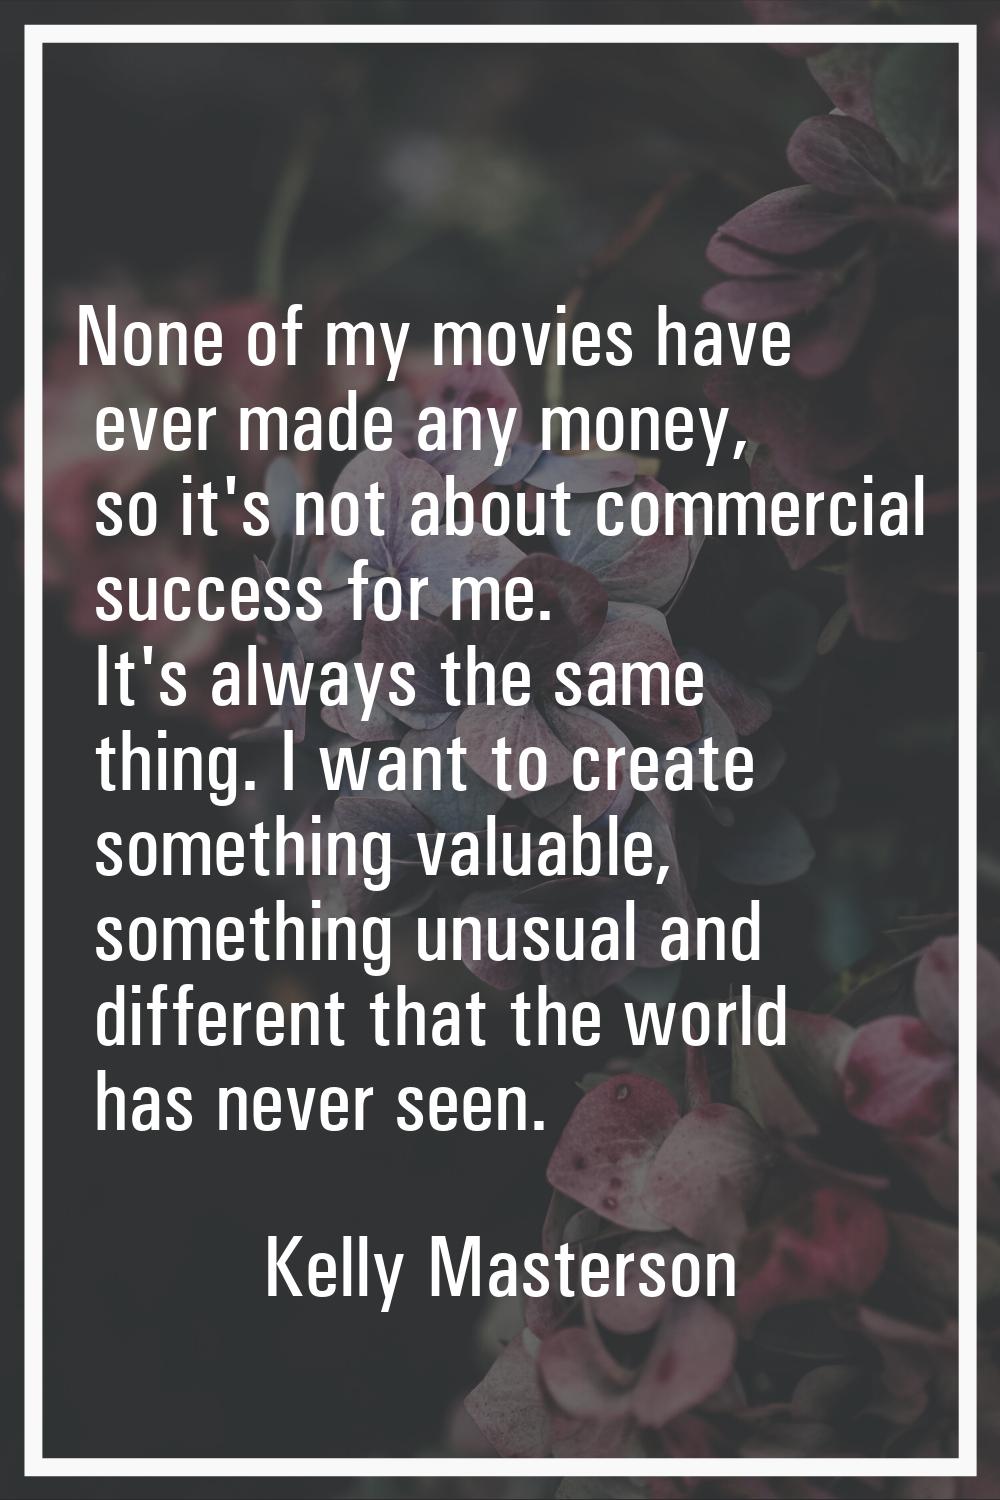 None of my movies have ever made any money, so it's not about commercial success for me. It's alway